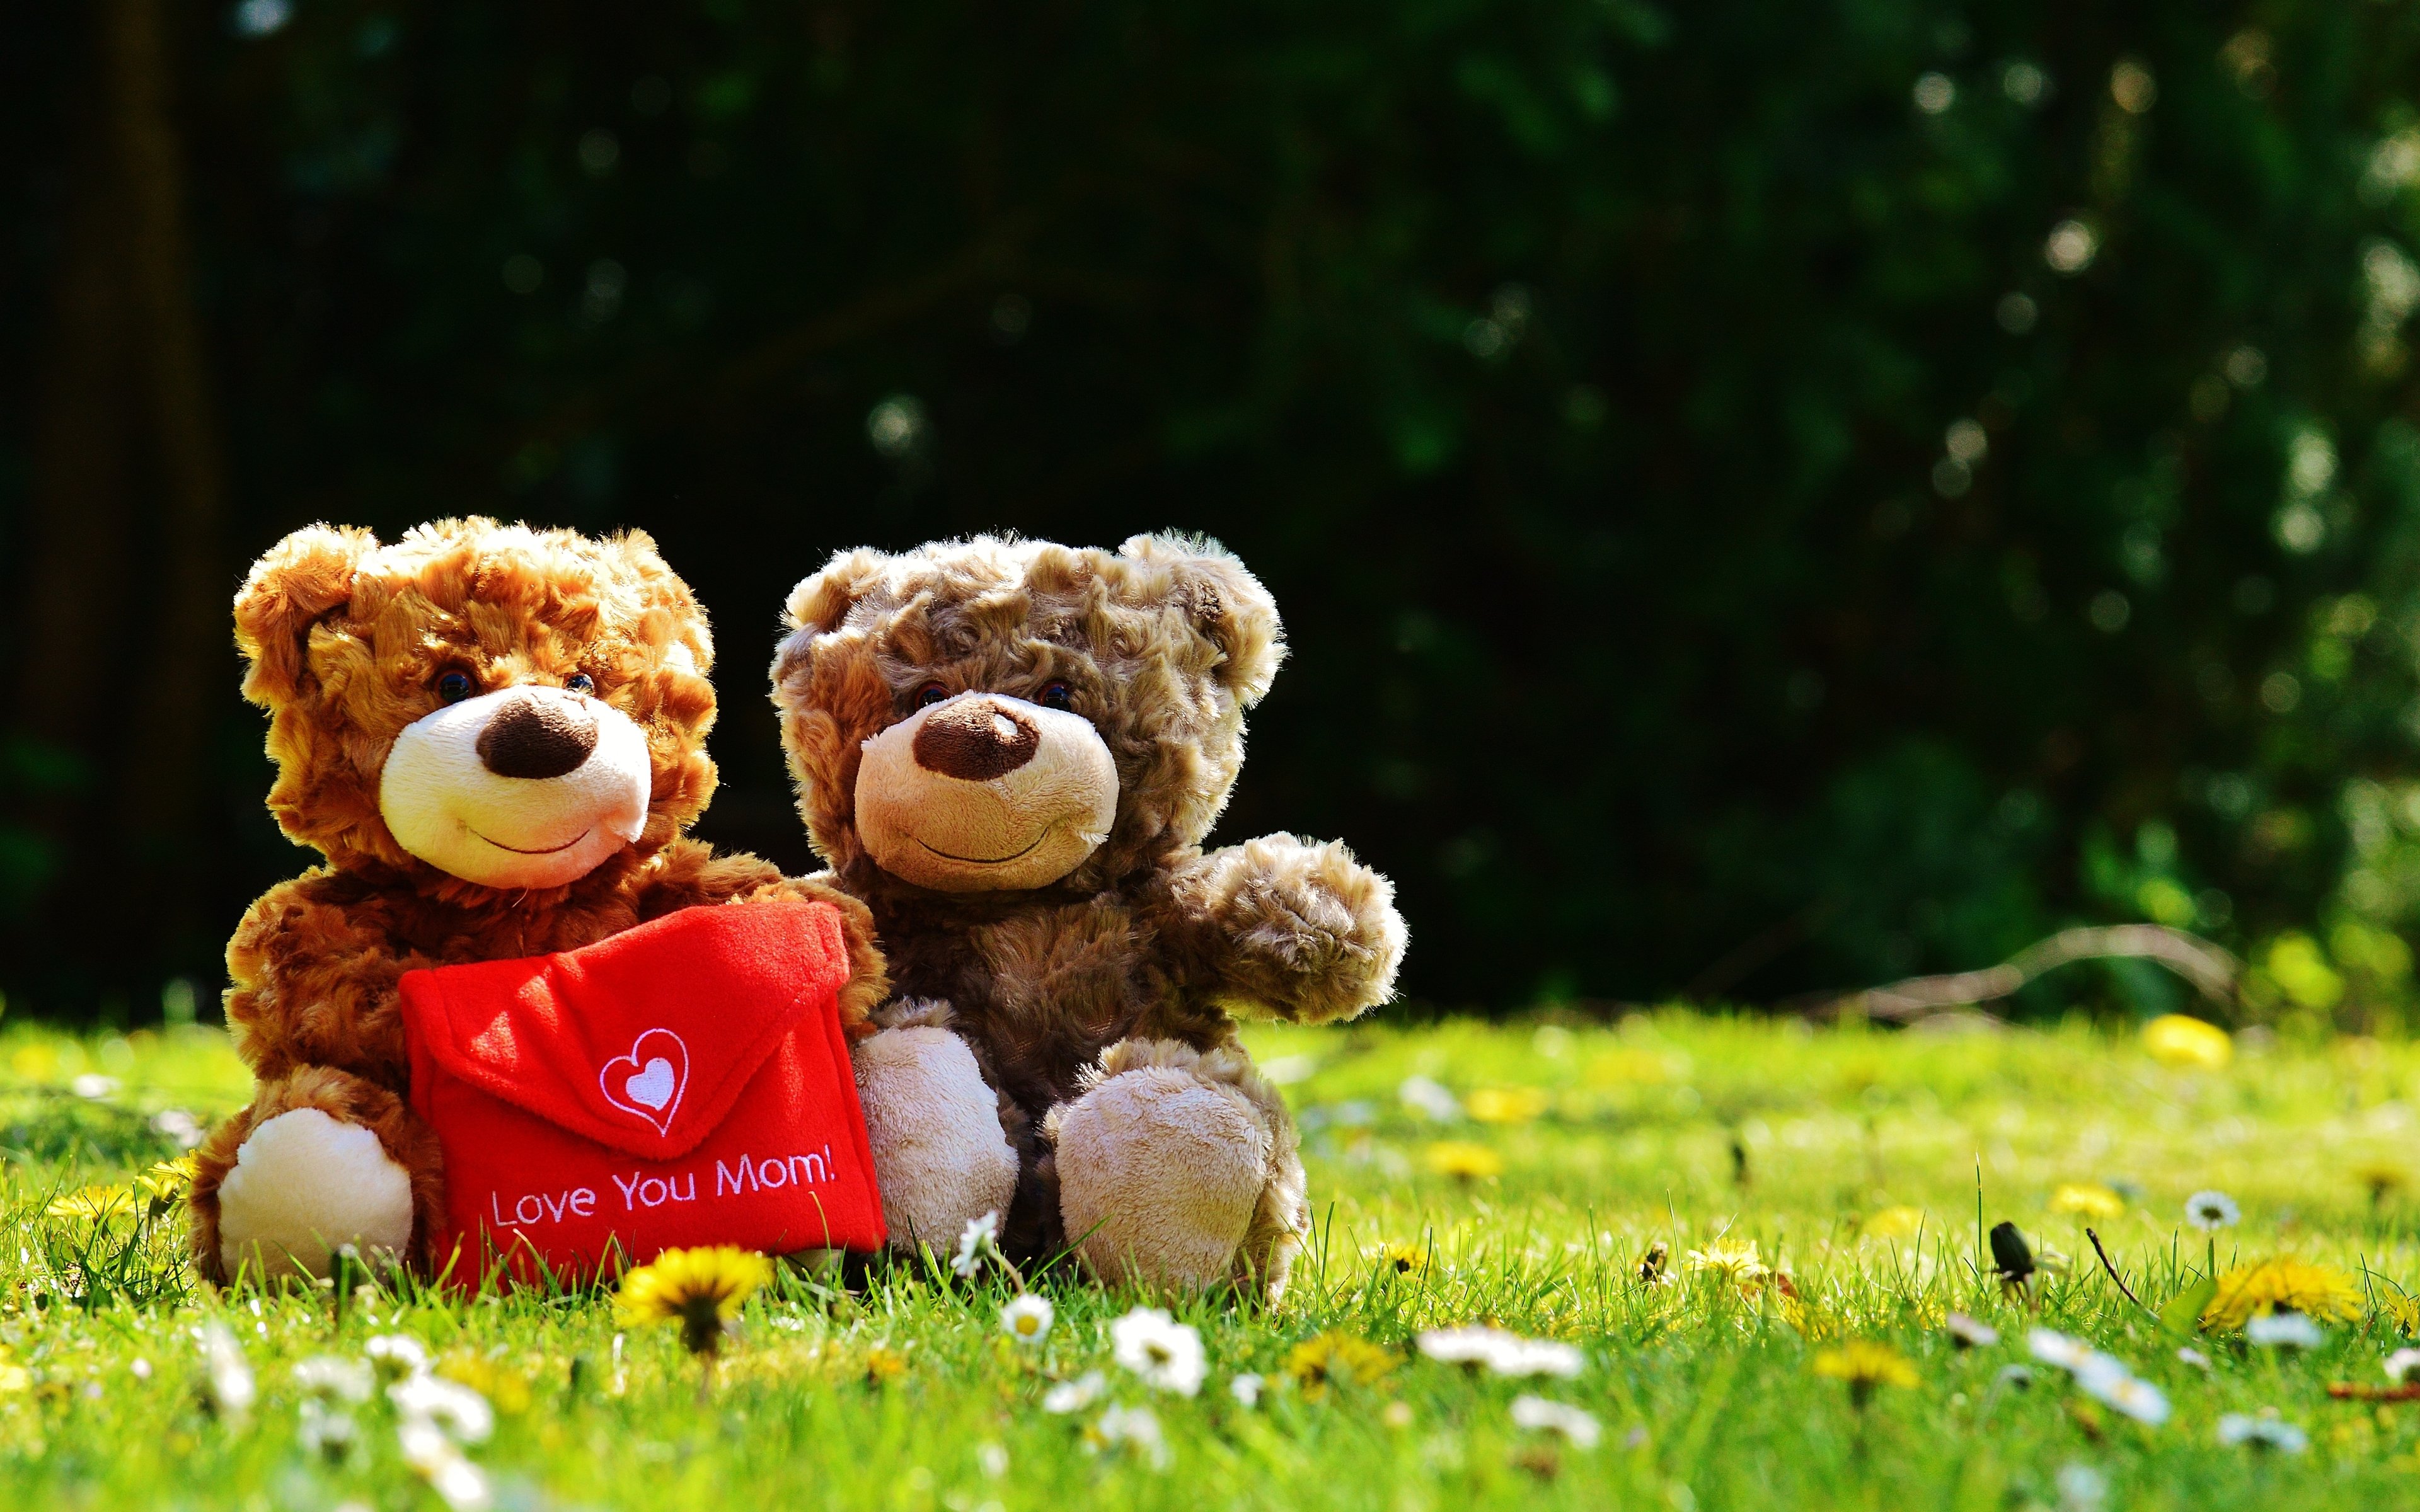 Happy Mothers Day Love You Mom - Happy Teddy Day 2020 , HD Wallpaper & Backgrounds